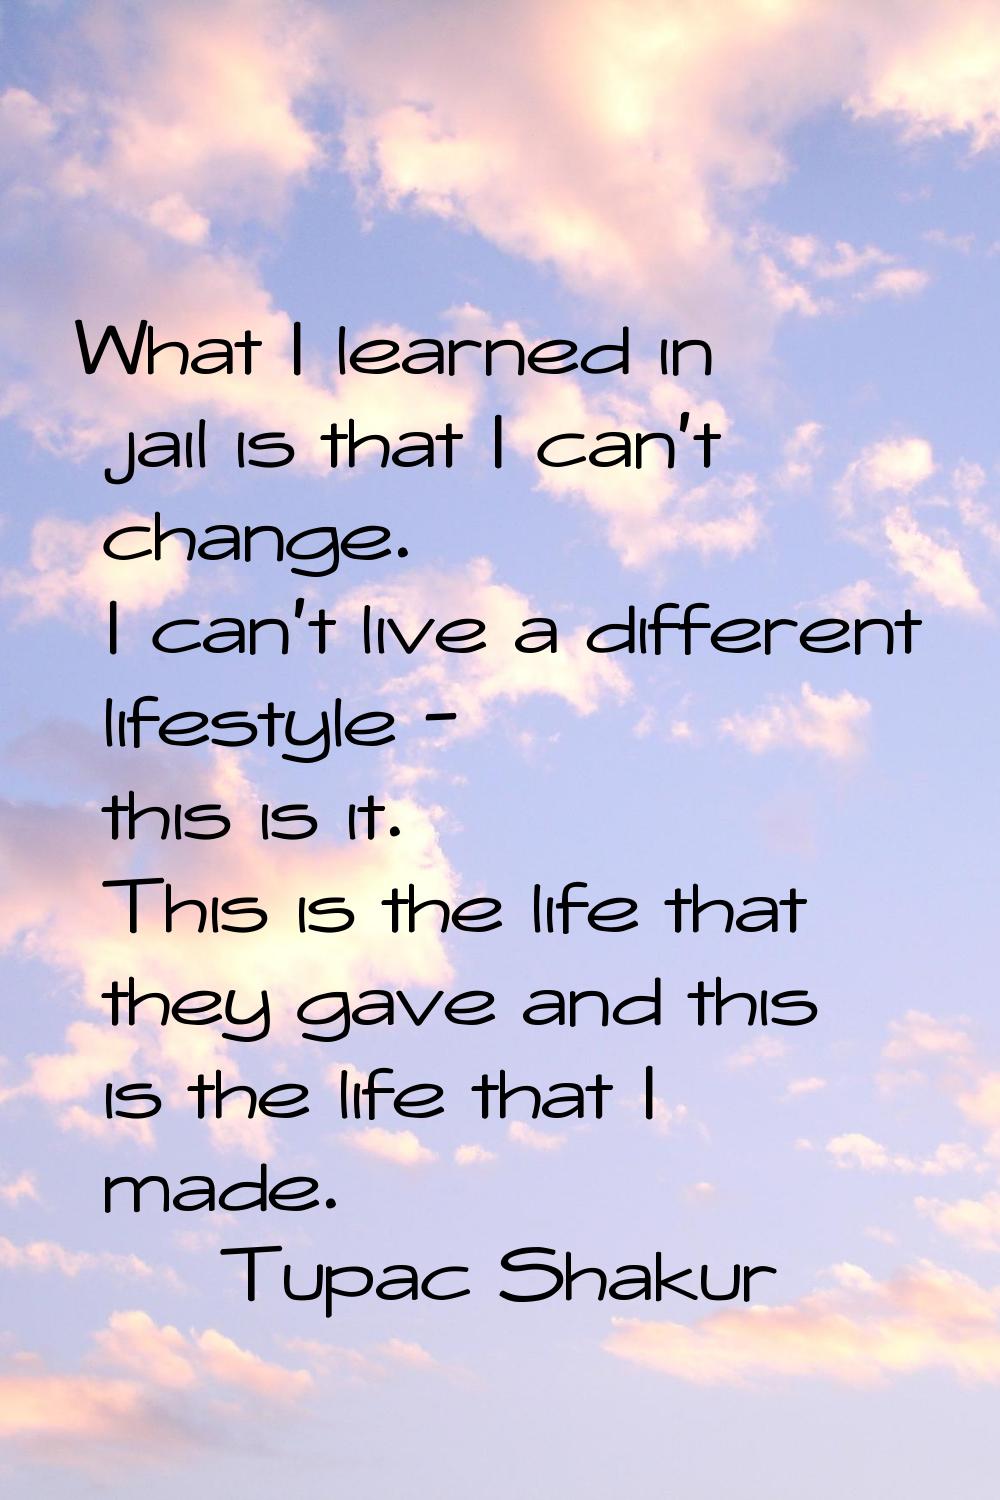 What I learned in jail is that I can't change. I can't live a different lifestyle - this is it. Thi